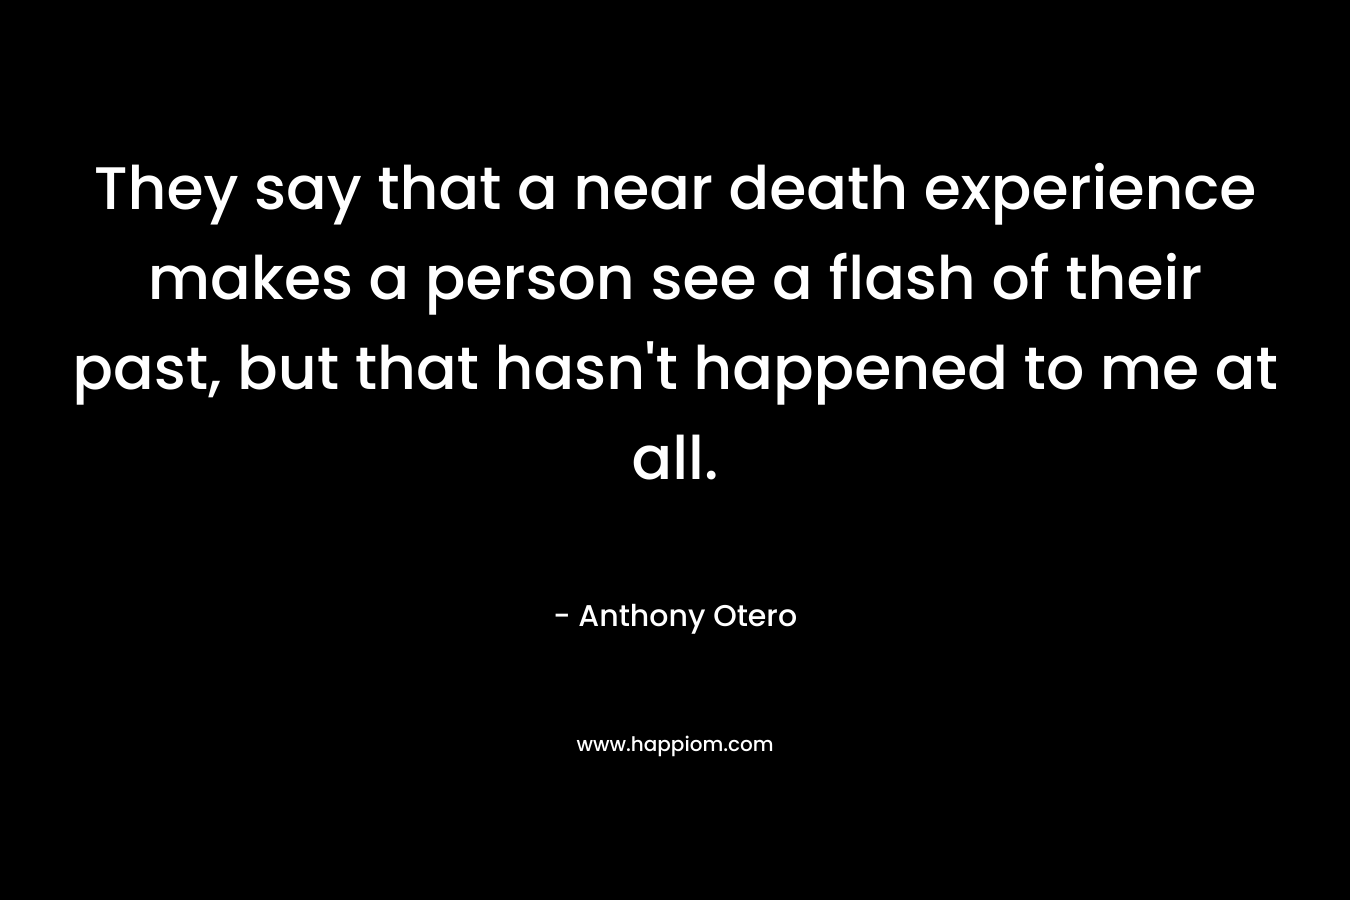 They say that a near death experience makes a person see a flash of their past, but that hasn't happened to me at all.